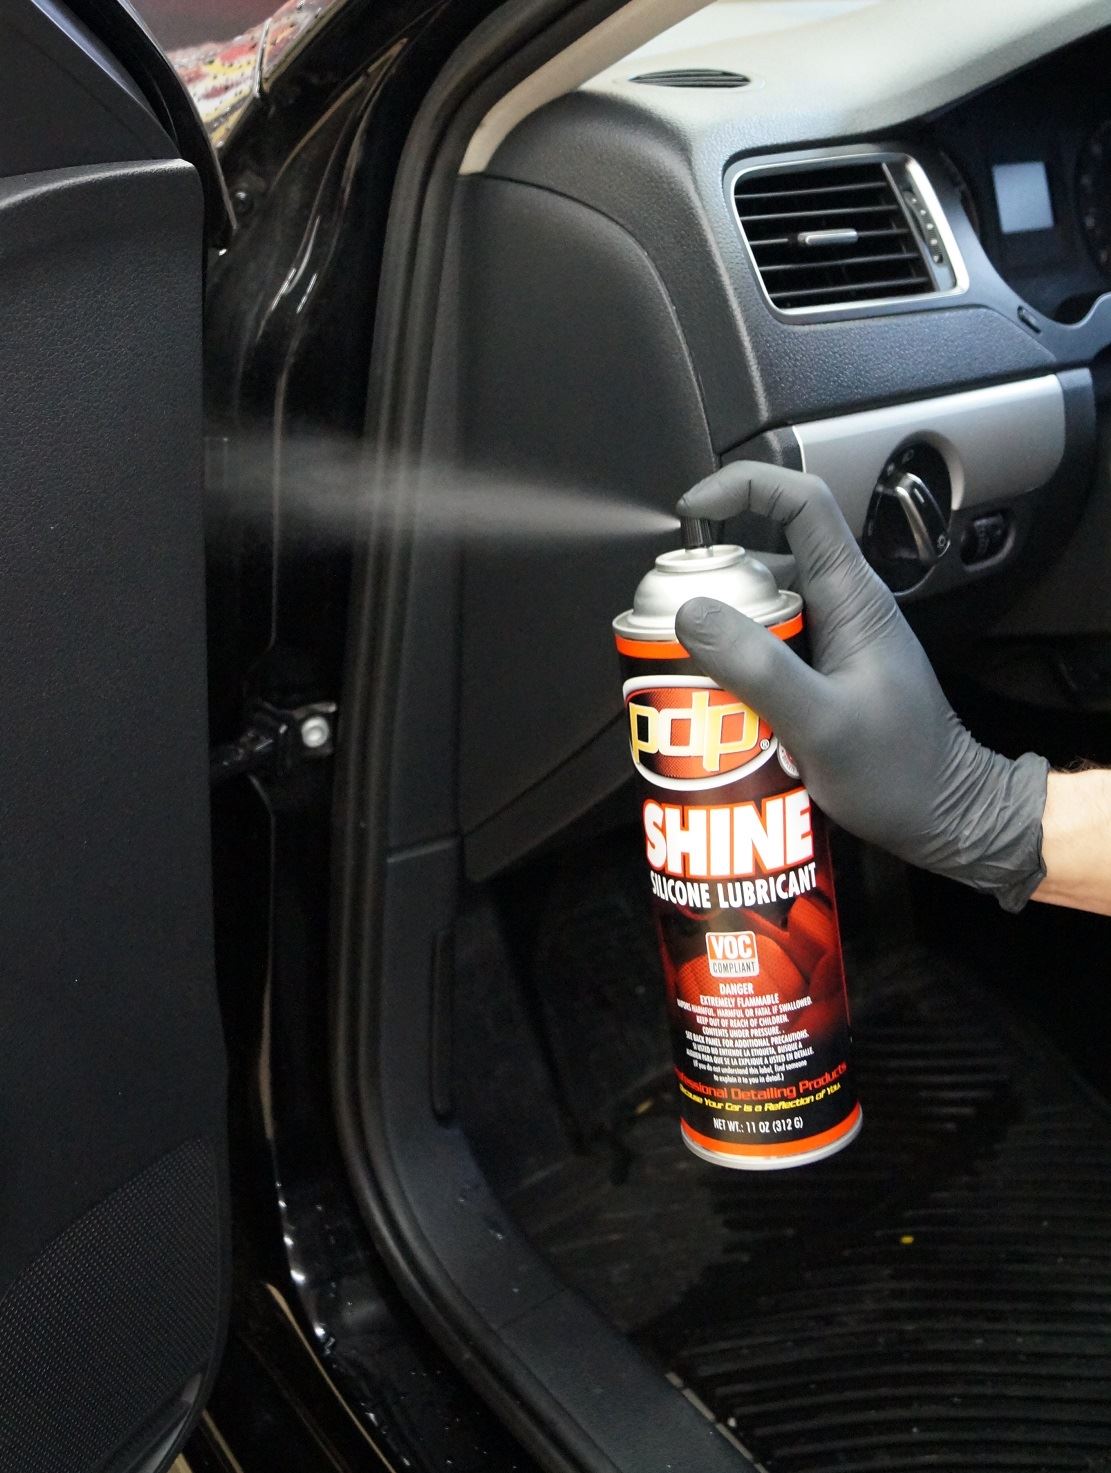 Slick Products on Instagram: Special Offer: Up To 30% Off Shine &  Protectant Renew the life, look, and value of your vehicle with this  easy-to-use silicone-based coating. Slick Products Shine & Protectant